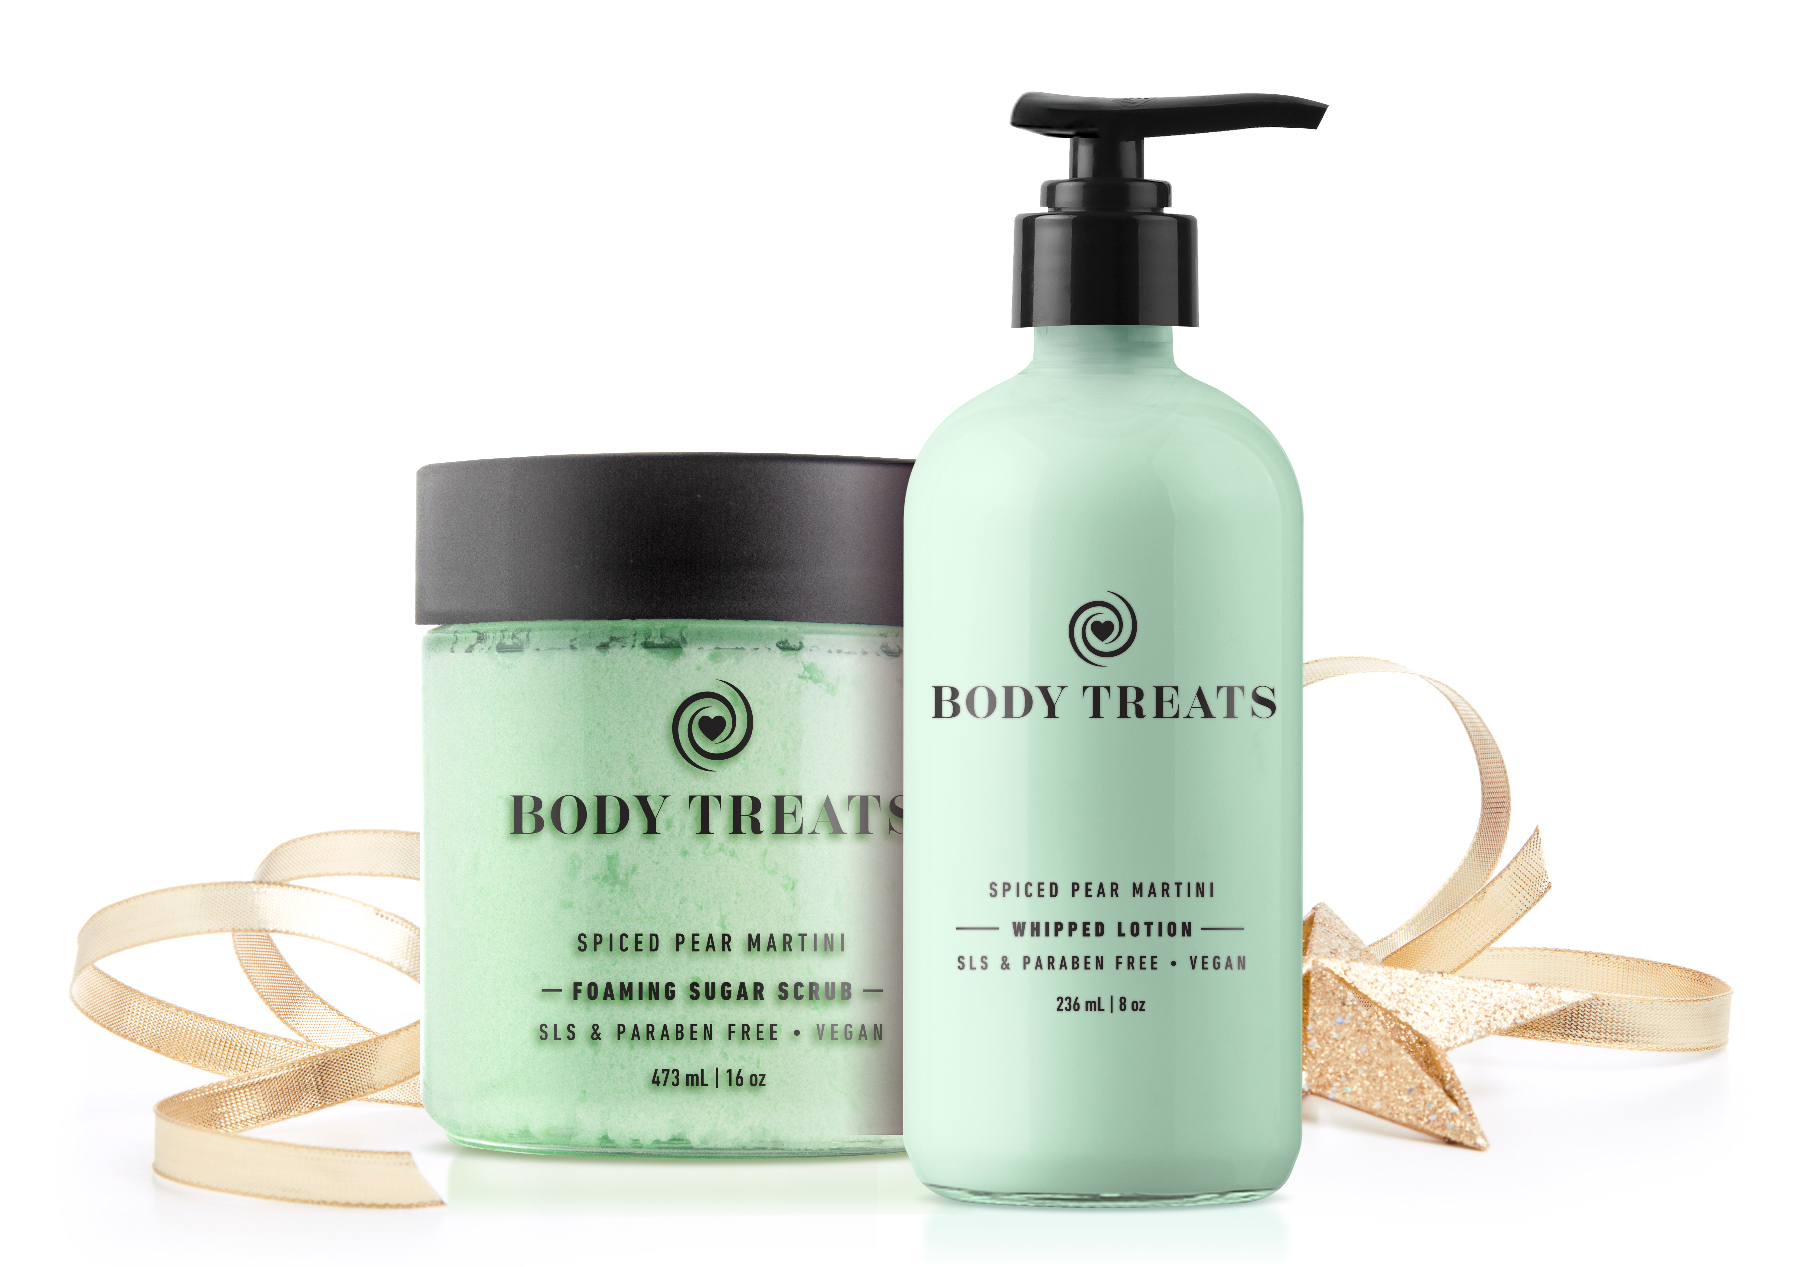 Body Treats - Branding and Packaging Design